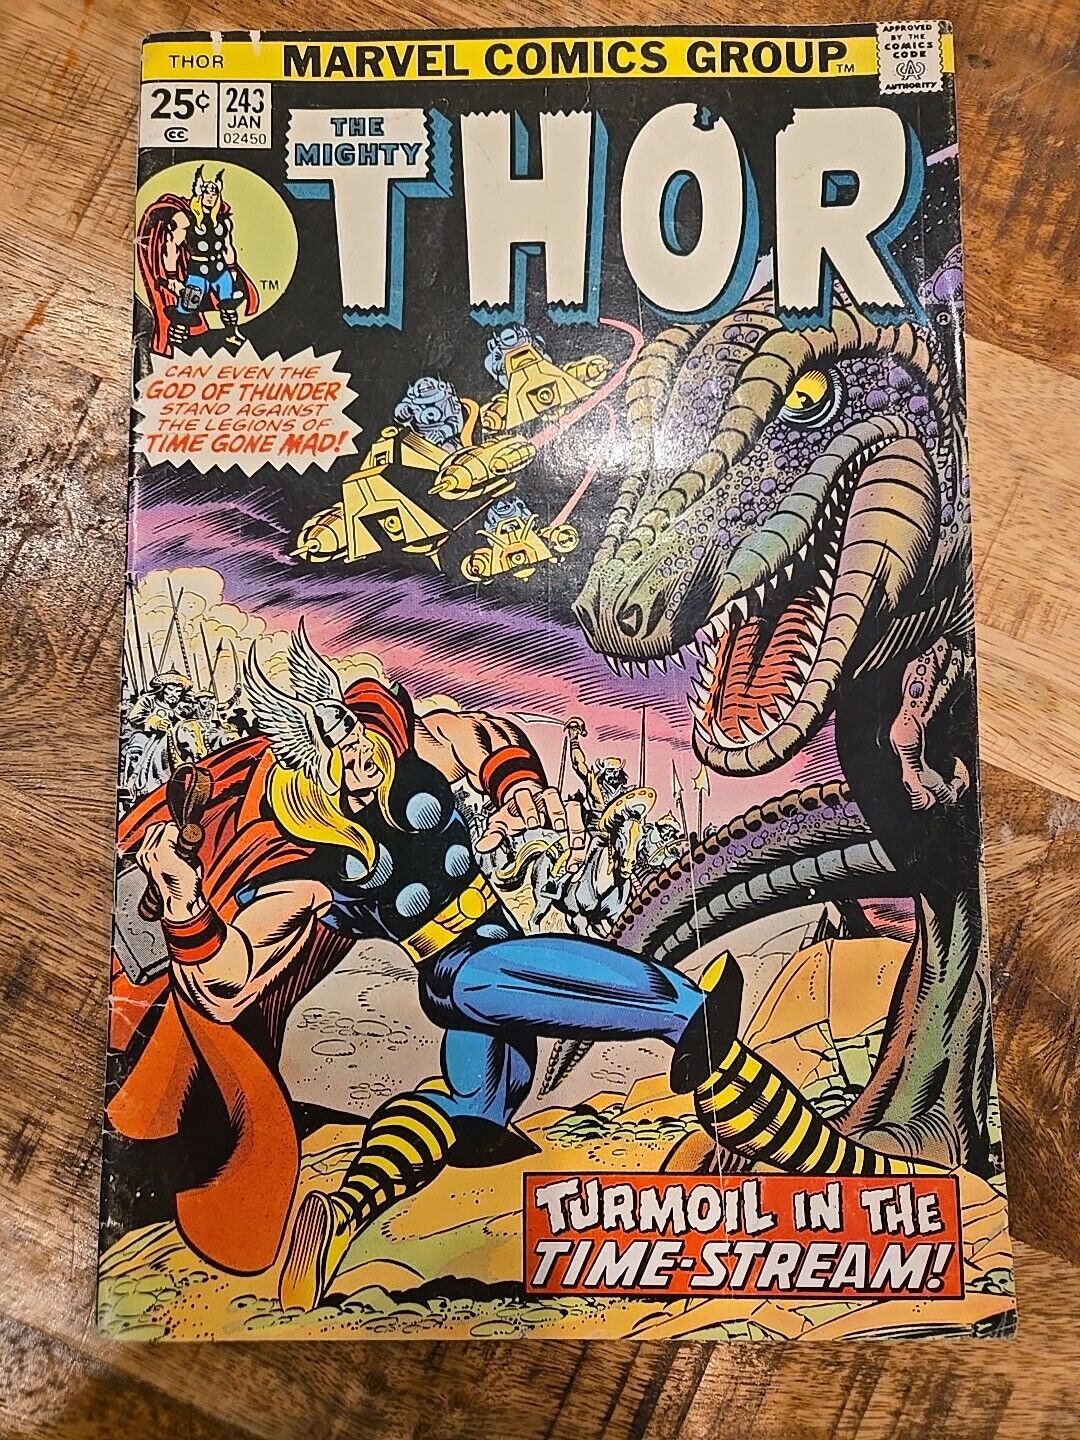 The Mighty Thor #243